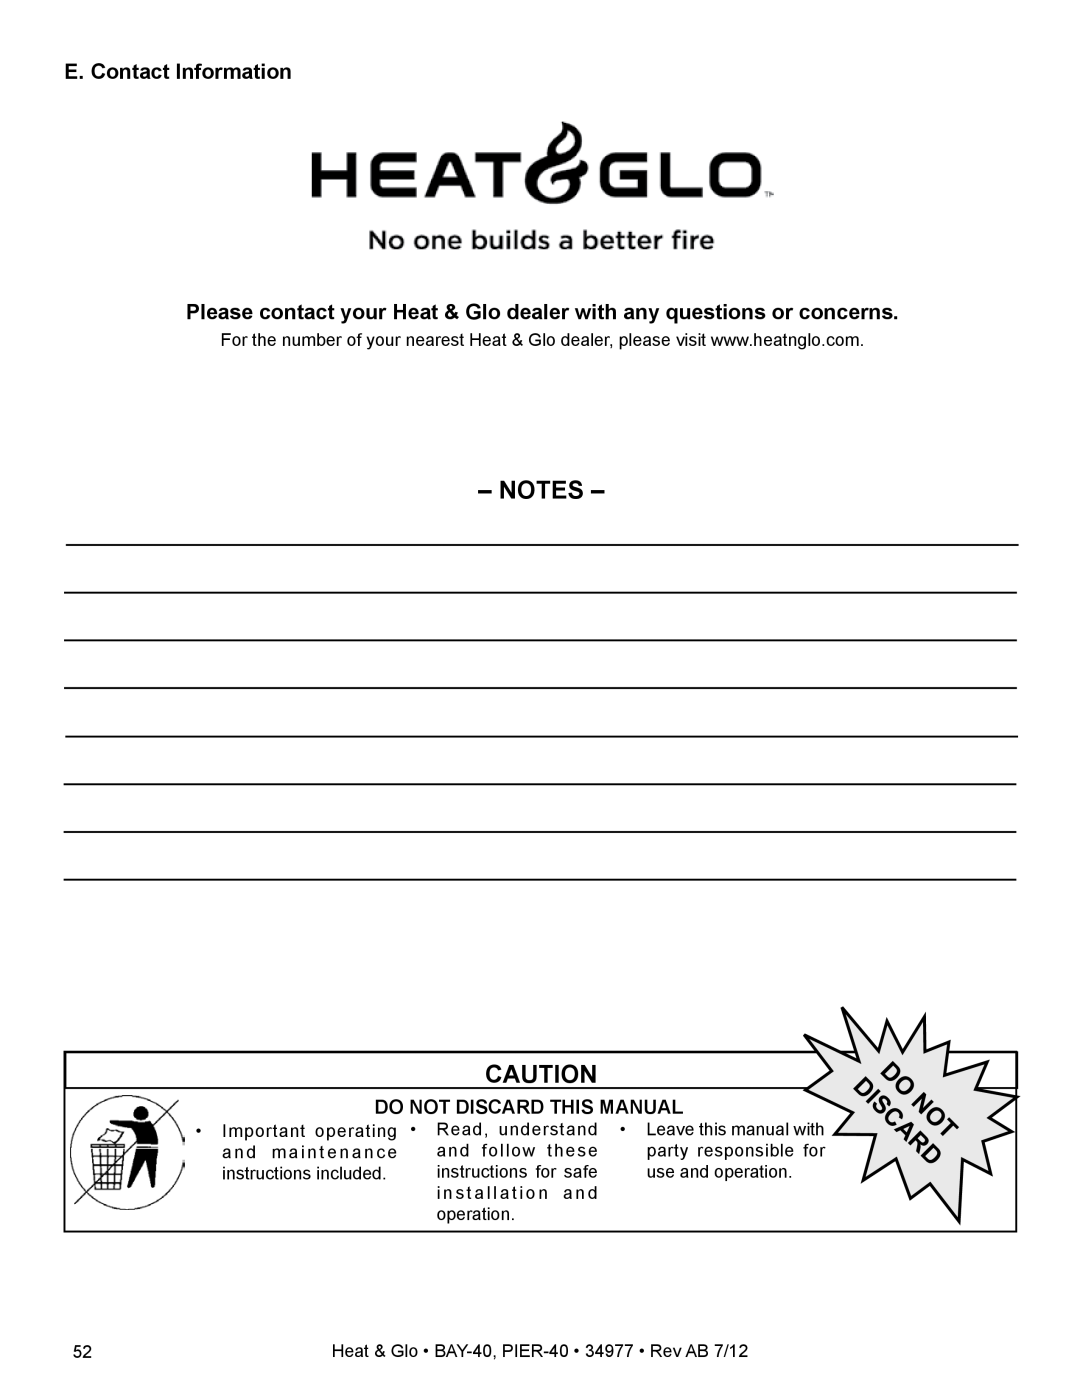 Heat & Glo LifeStyle PIER-40 owner manual E. Contact Information, Do Not Discard This Manual, Do Discardnot 